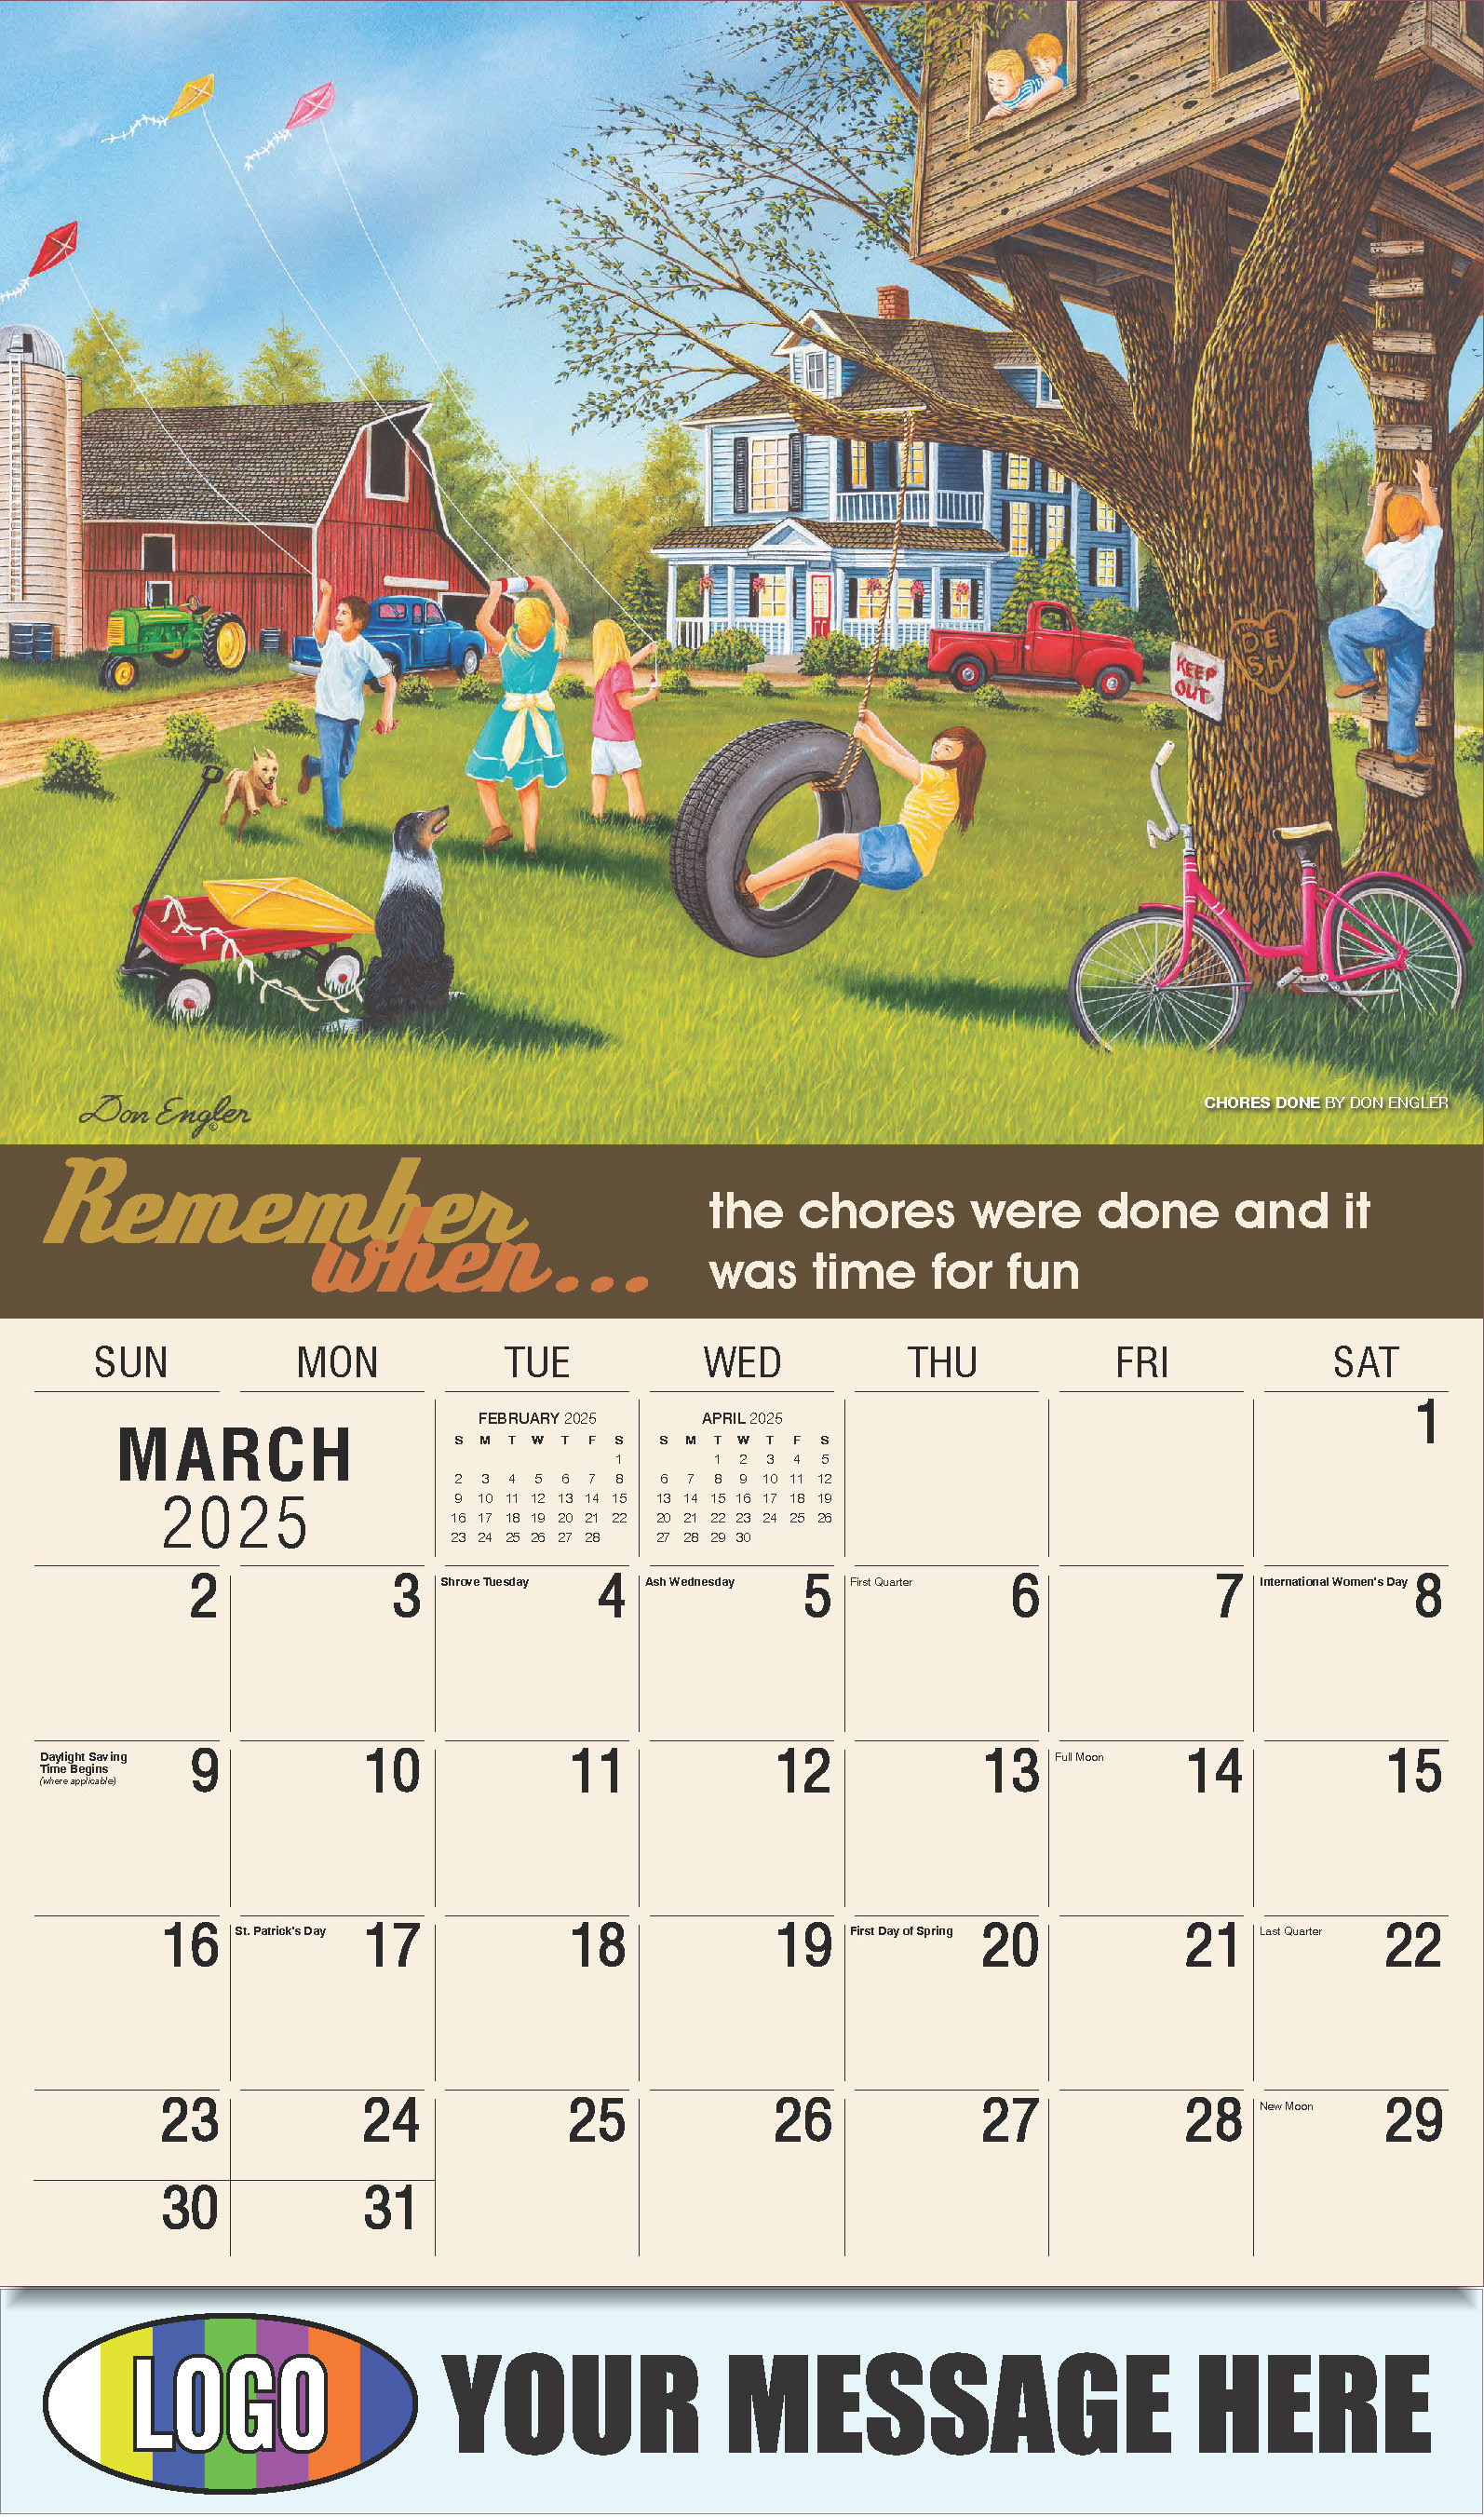 Remember When 2025 Business Advertising Calendar - March